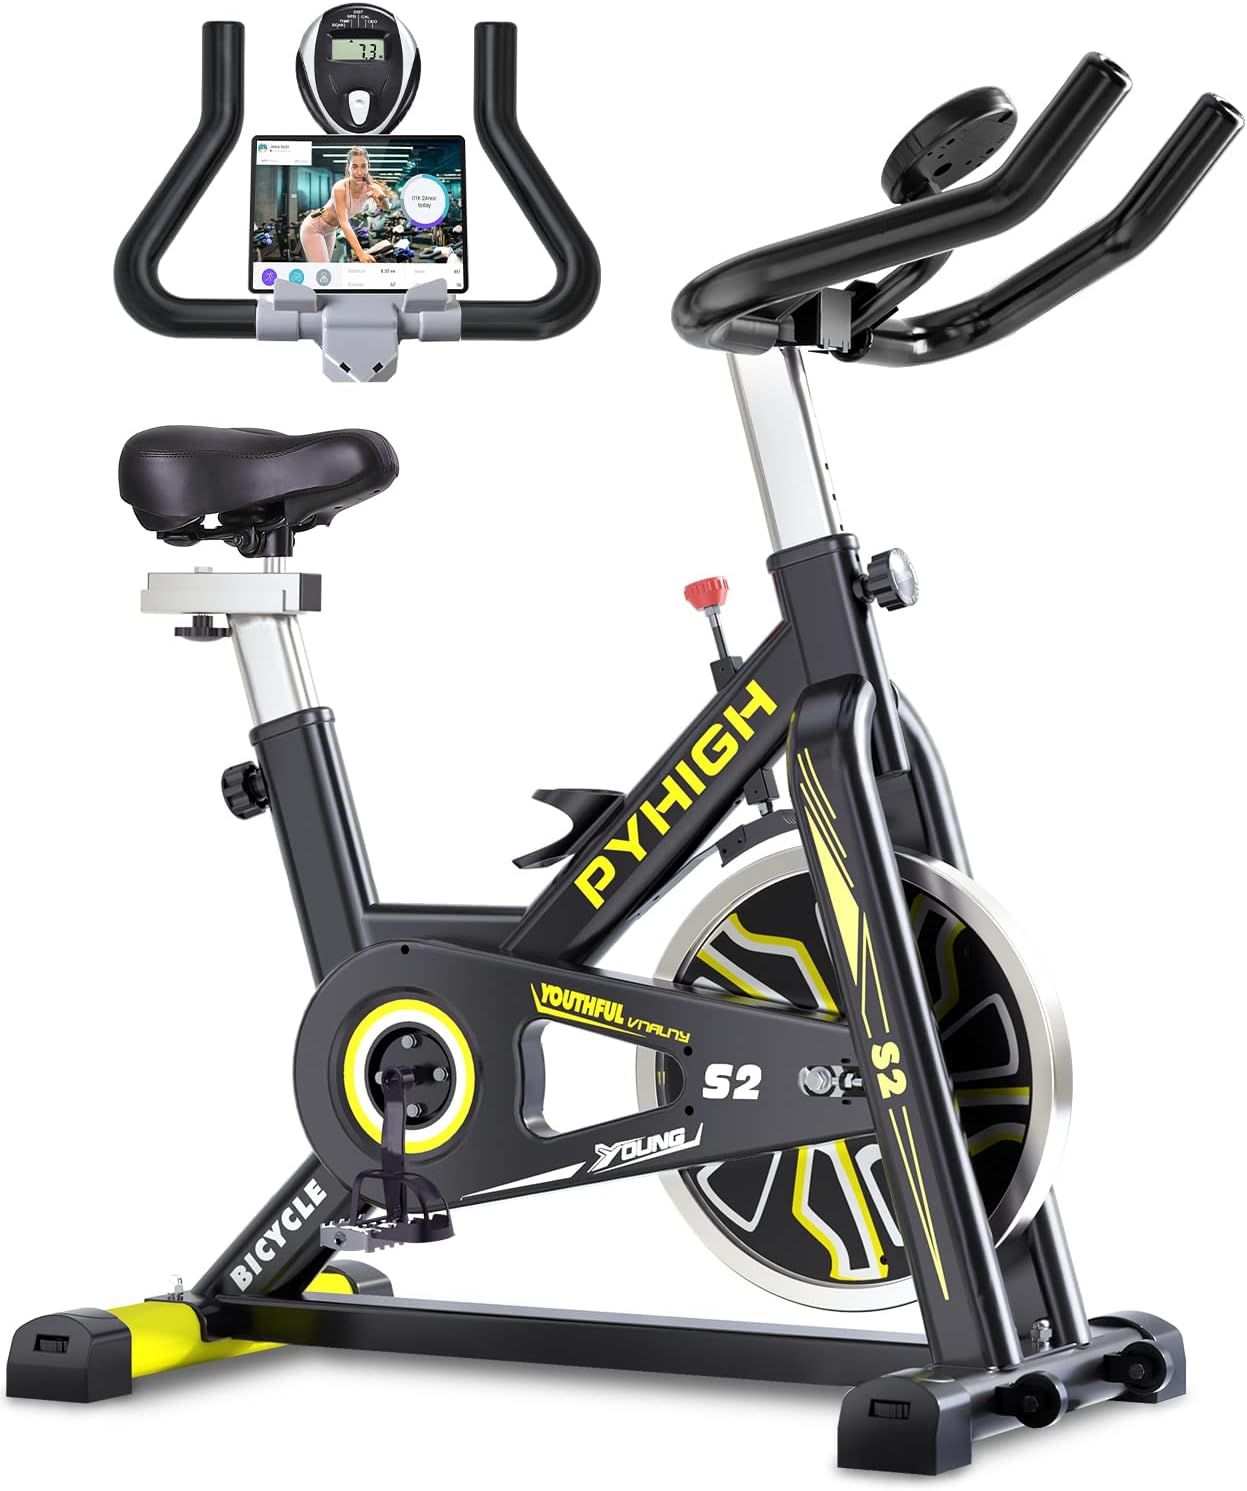 PYHIGH Stationary Exercise Bike for Home Indoor Cycling Bikes Excersize Bike Comfortable Seat Cushio | Amazon (US)